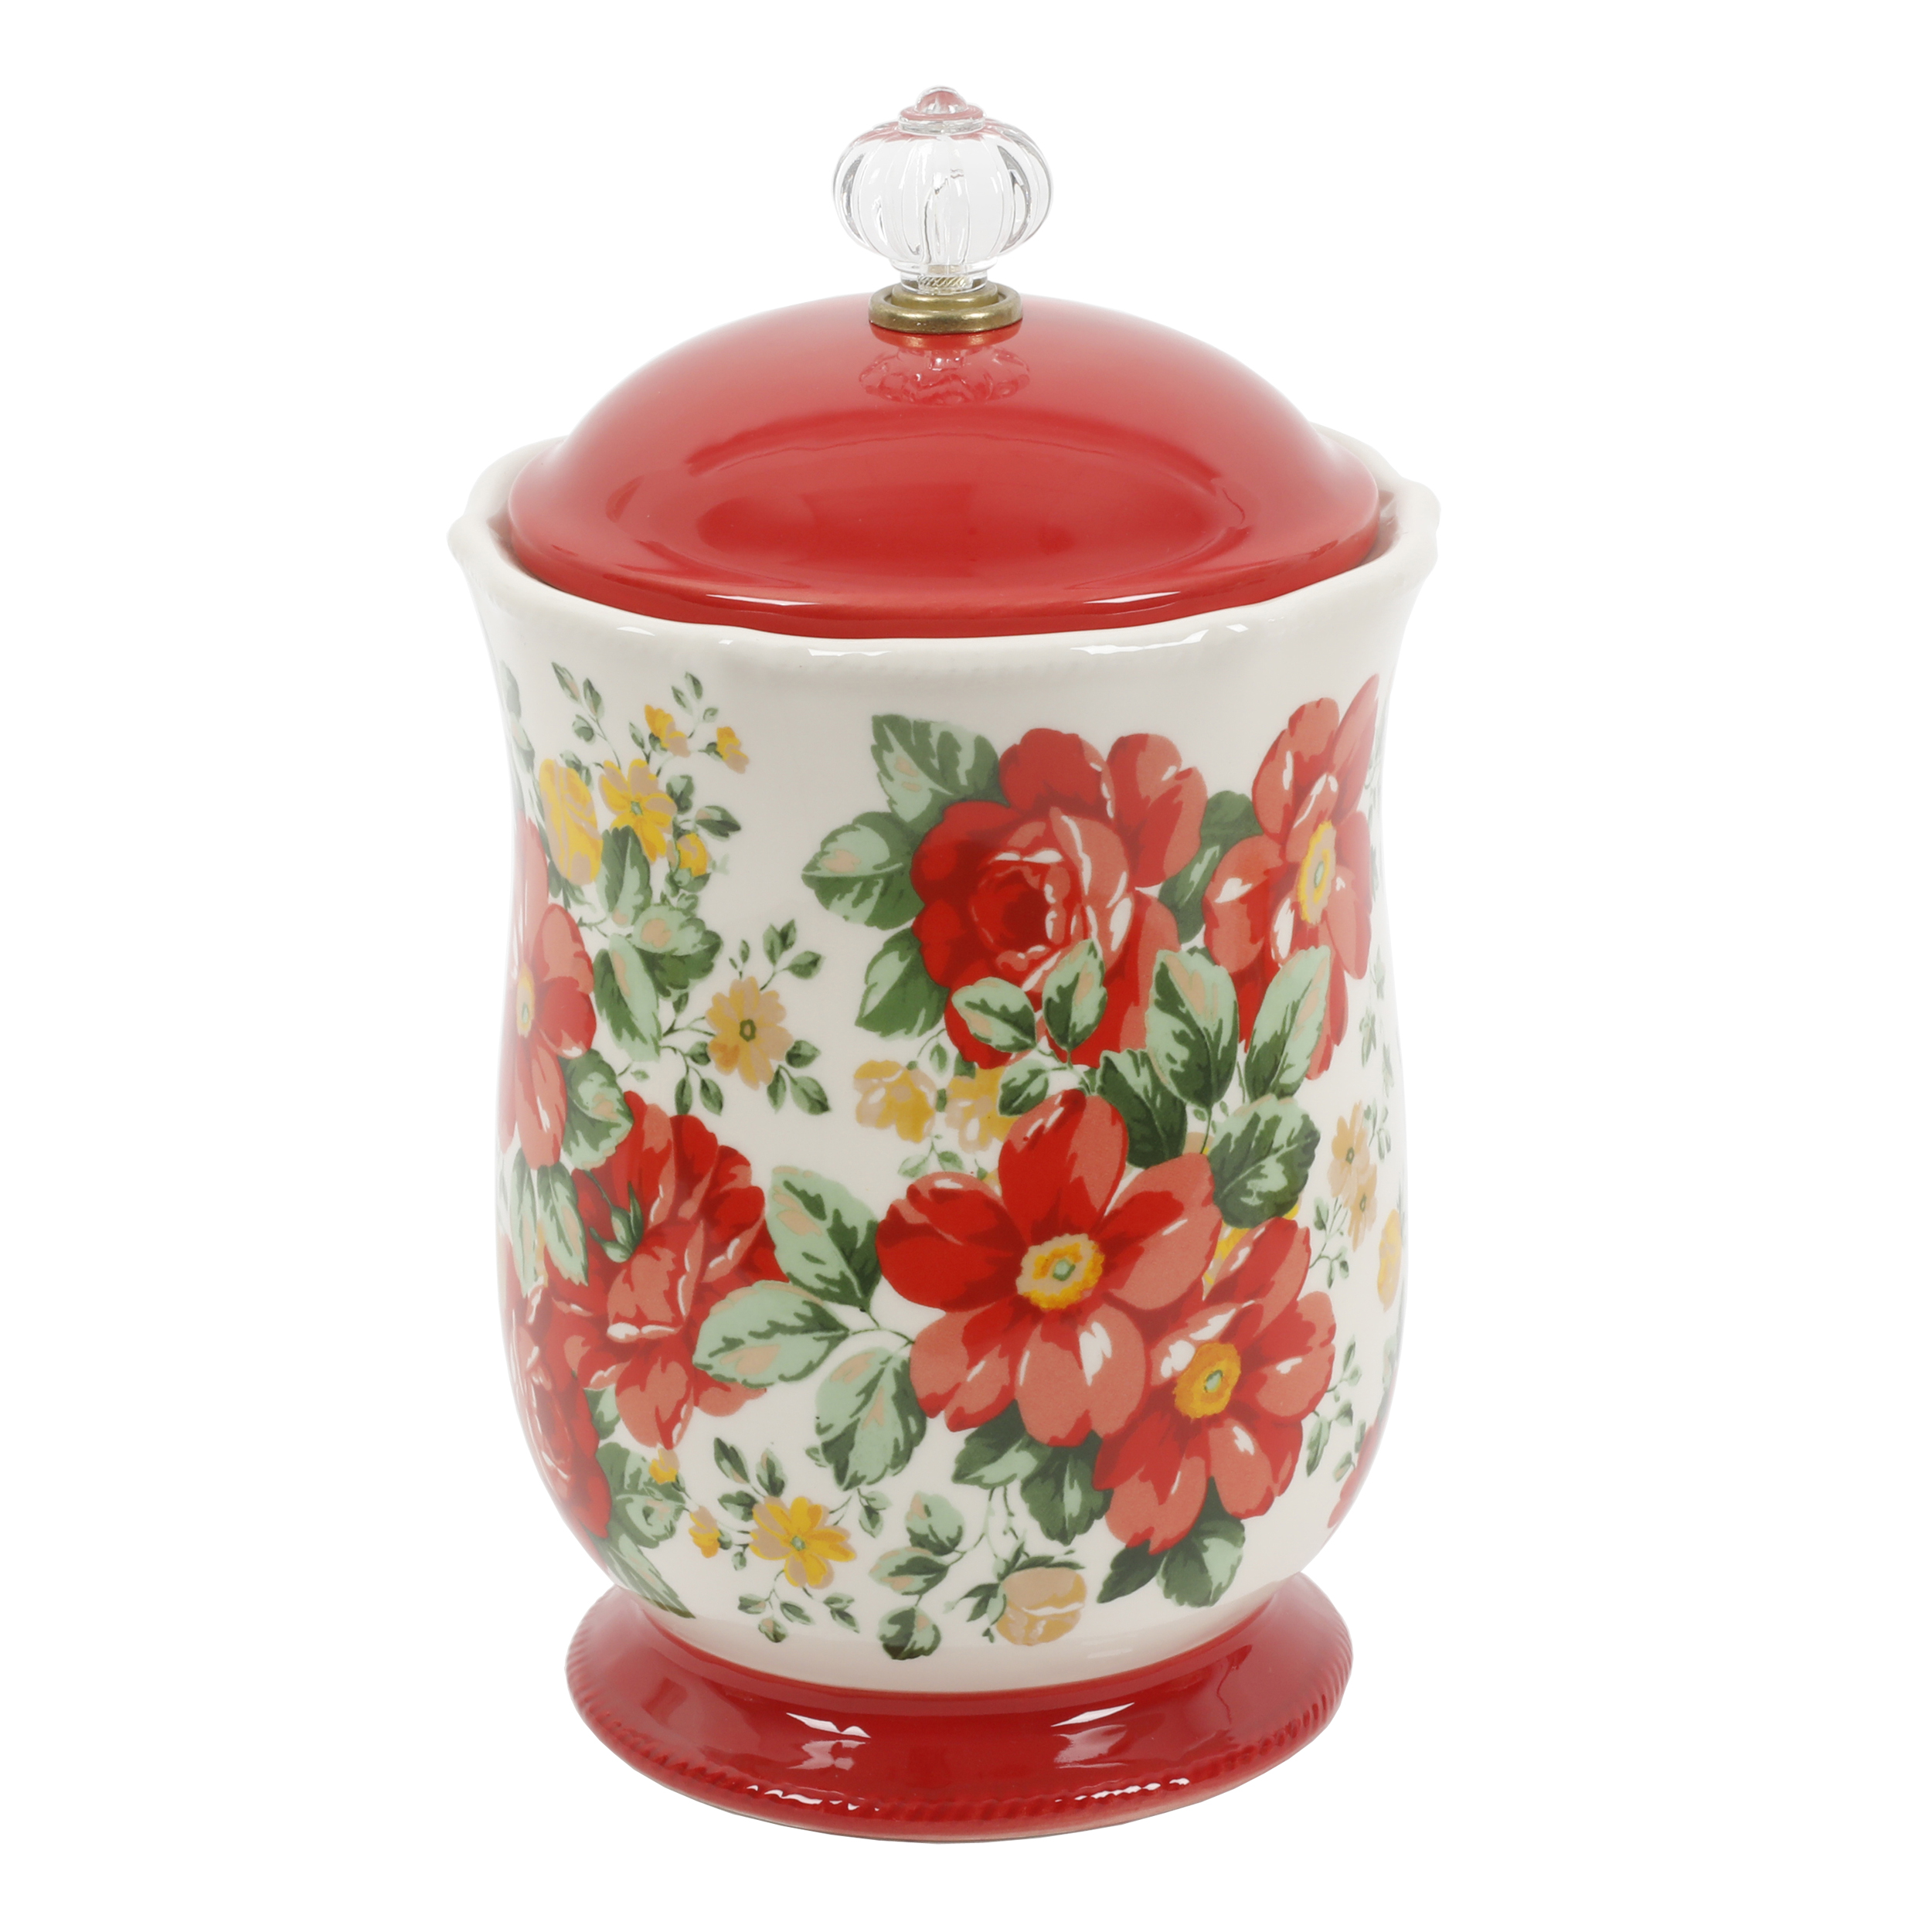 The Pioneer Woman Vintage Floral Canister with Acrylic Knob, 10" - image 3 of 5